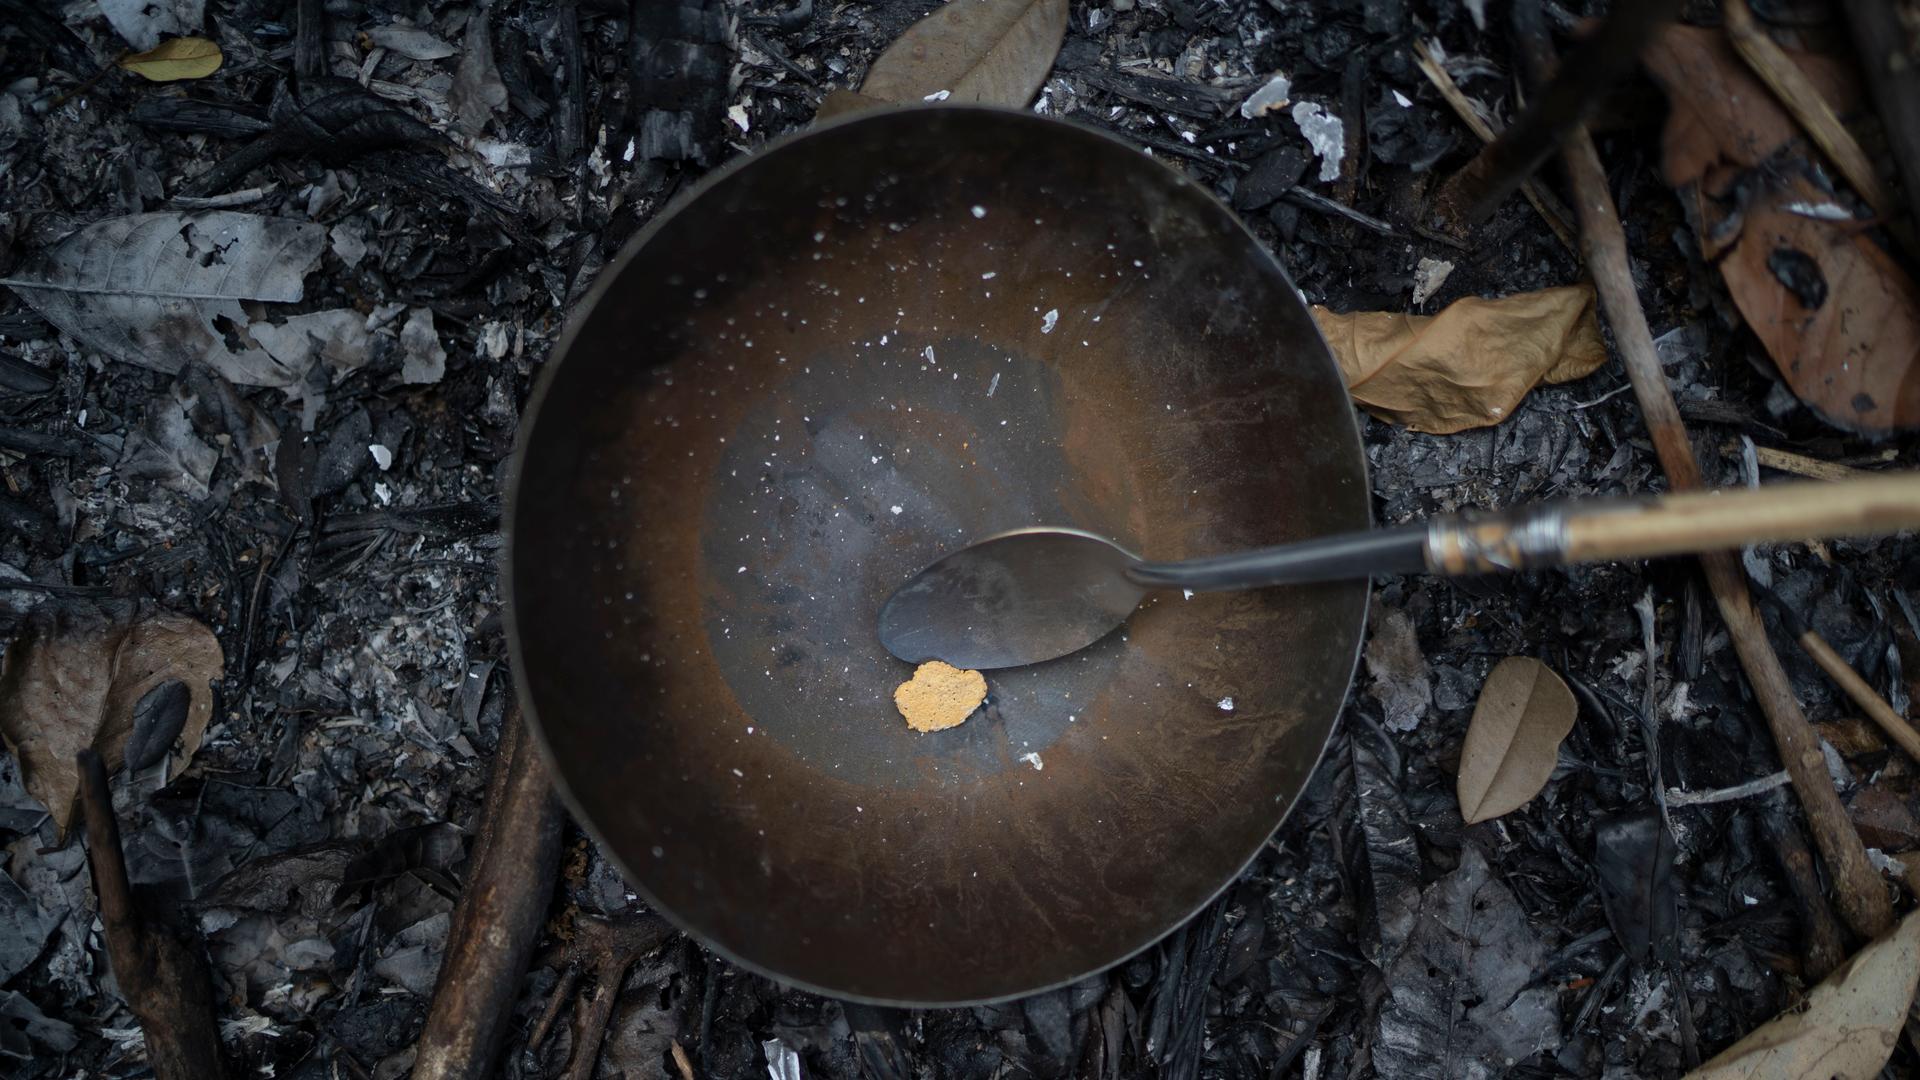 Gold sits in a pan moments after being torched to eliminate any mercury left, at an illegal mine the Amazon jungle, in the Itaituba area of Para state, Brazil, Friday, Aug. 21, 2020. 